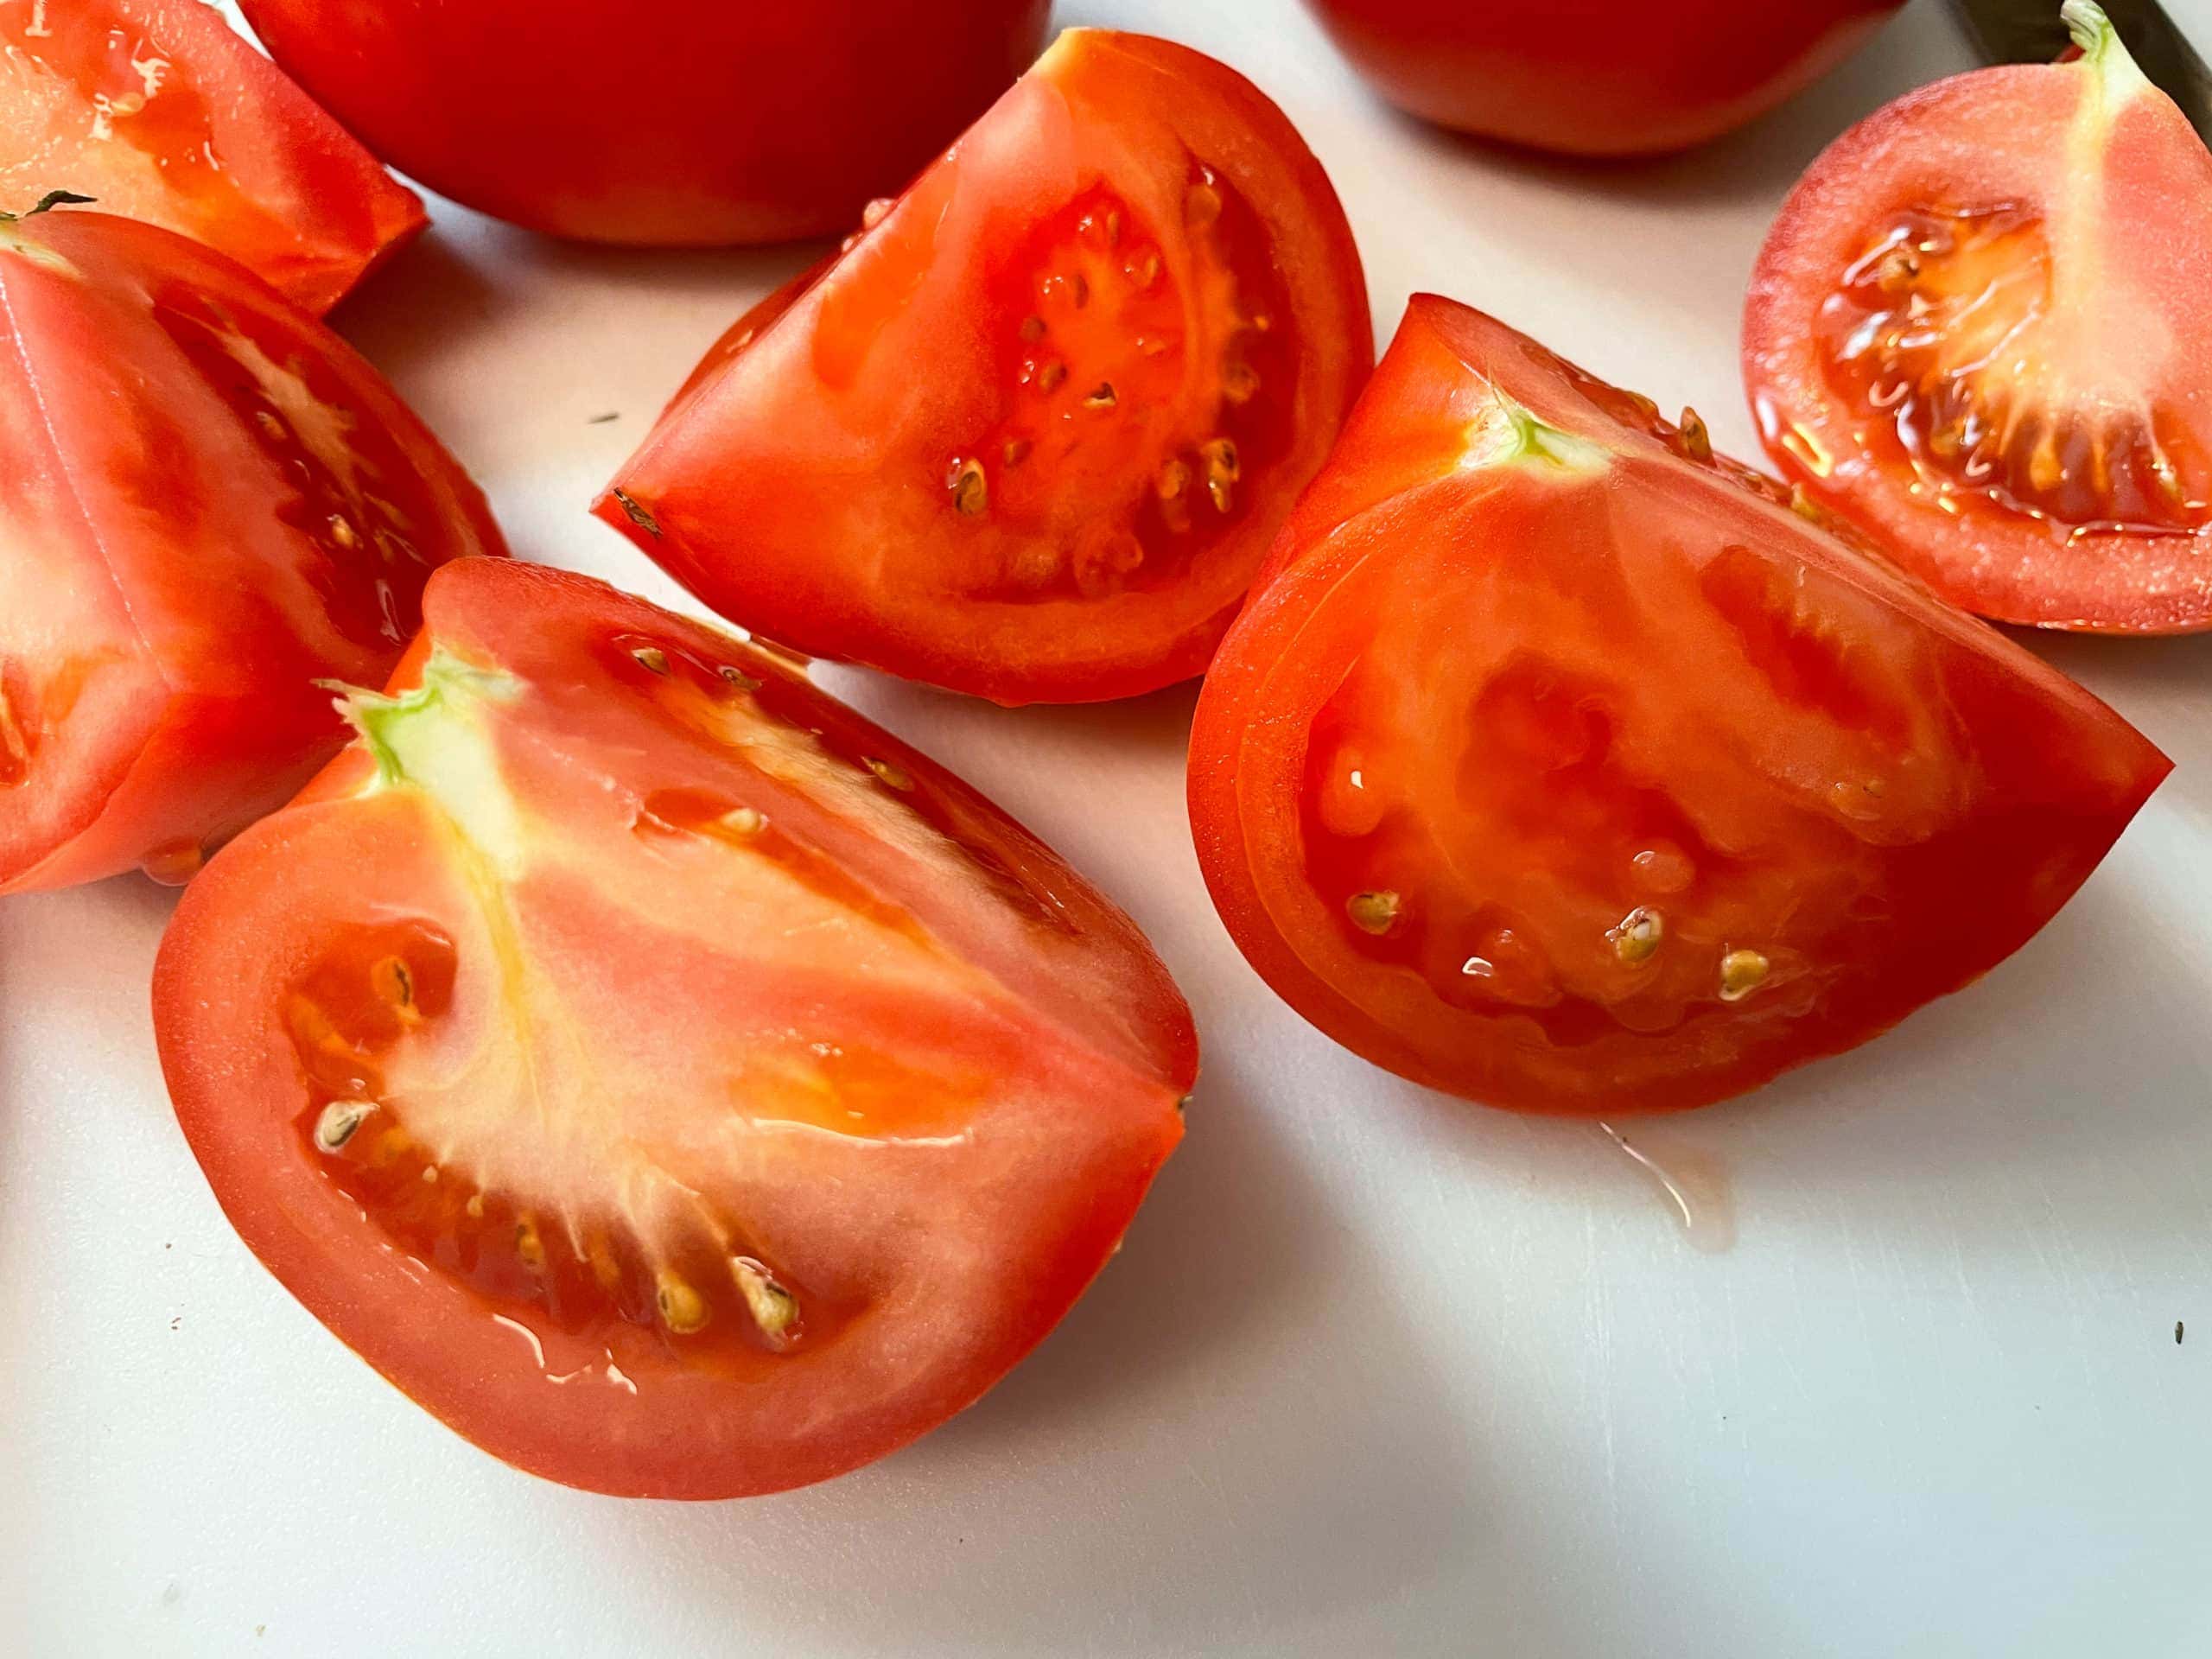 air fryer roasted tomatoes